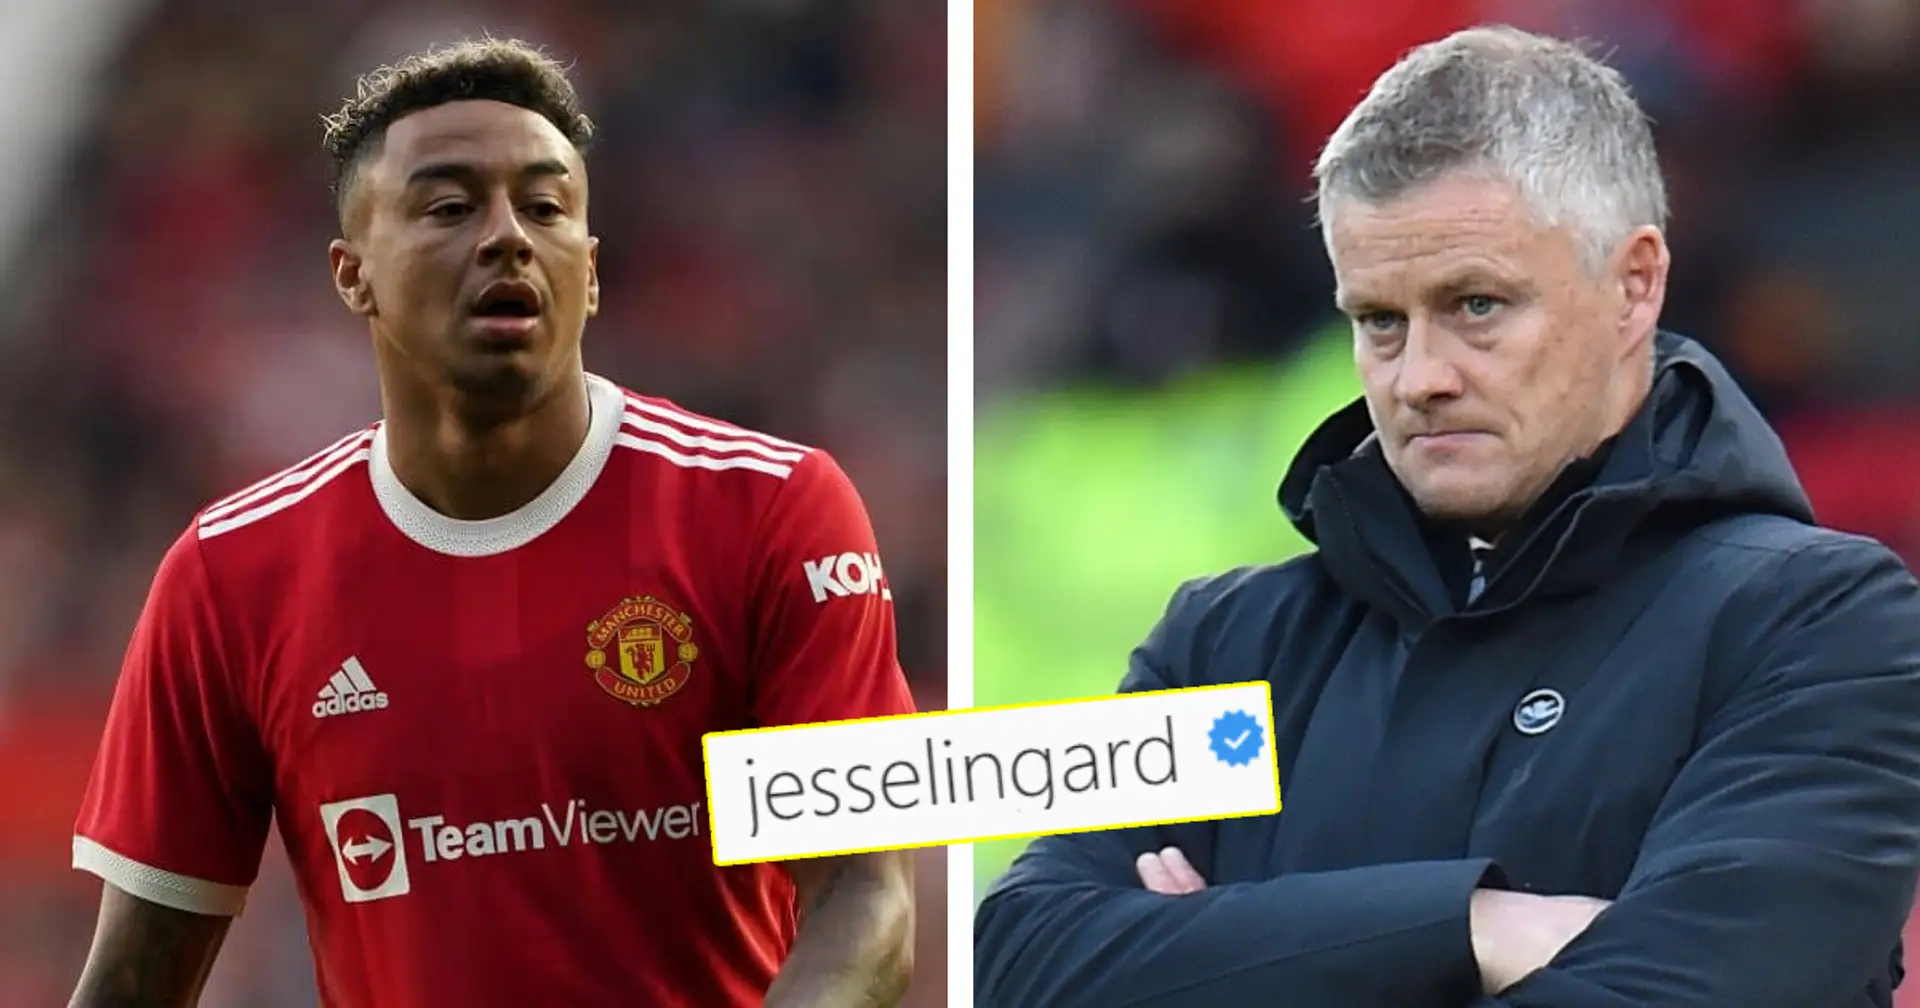 'Ole has lost the dressing room': Man United fans react to Jesse Lingard's latest Instagram post